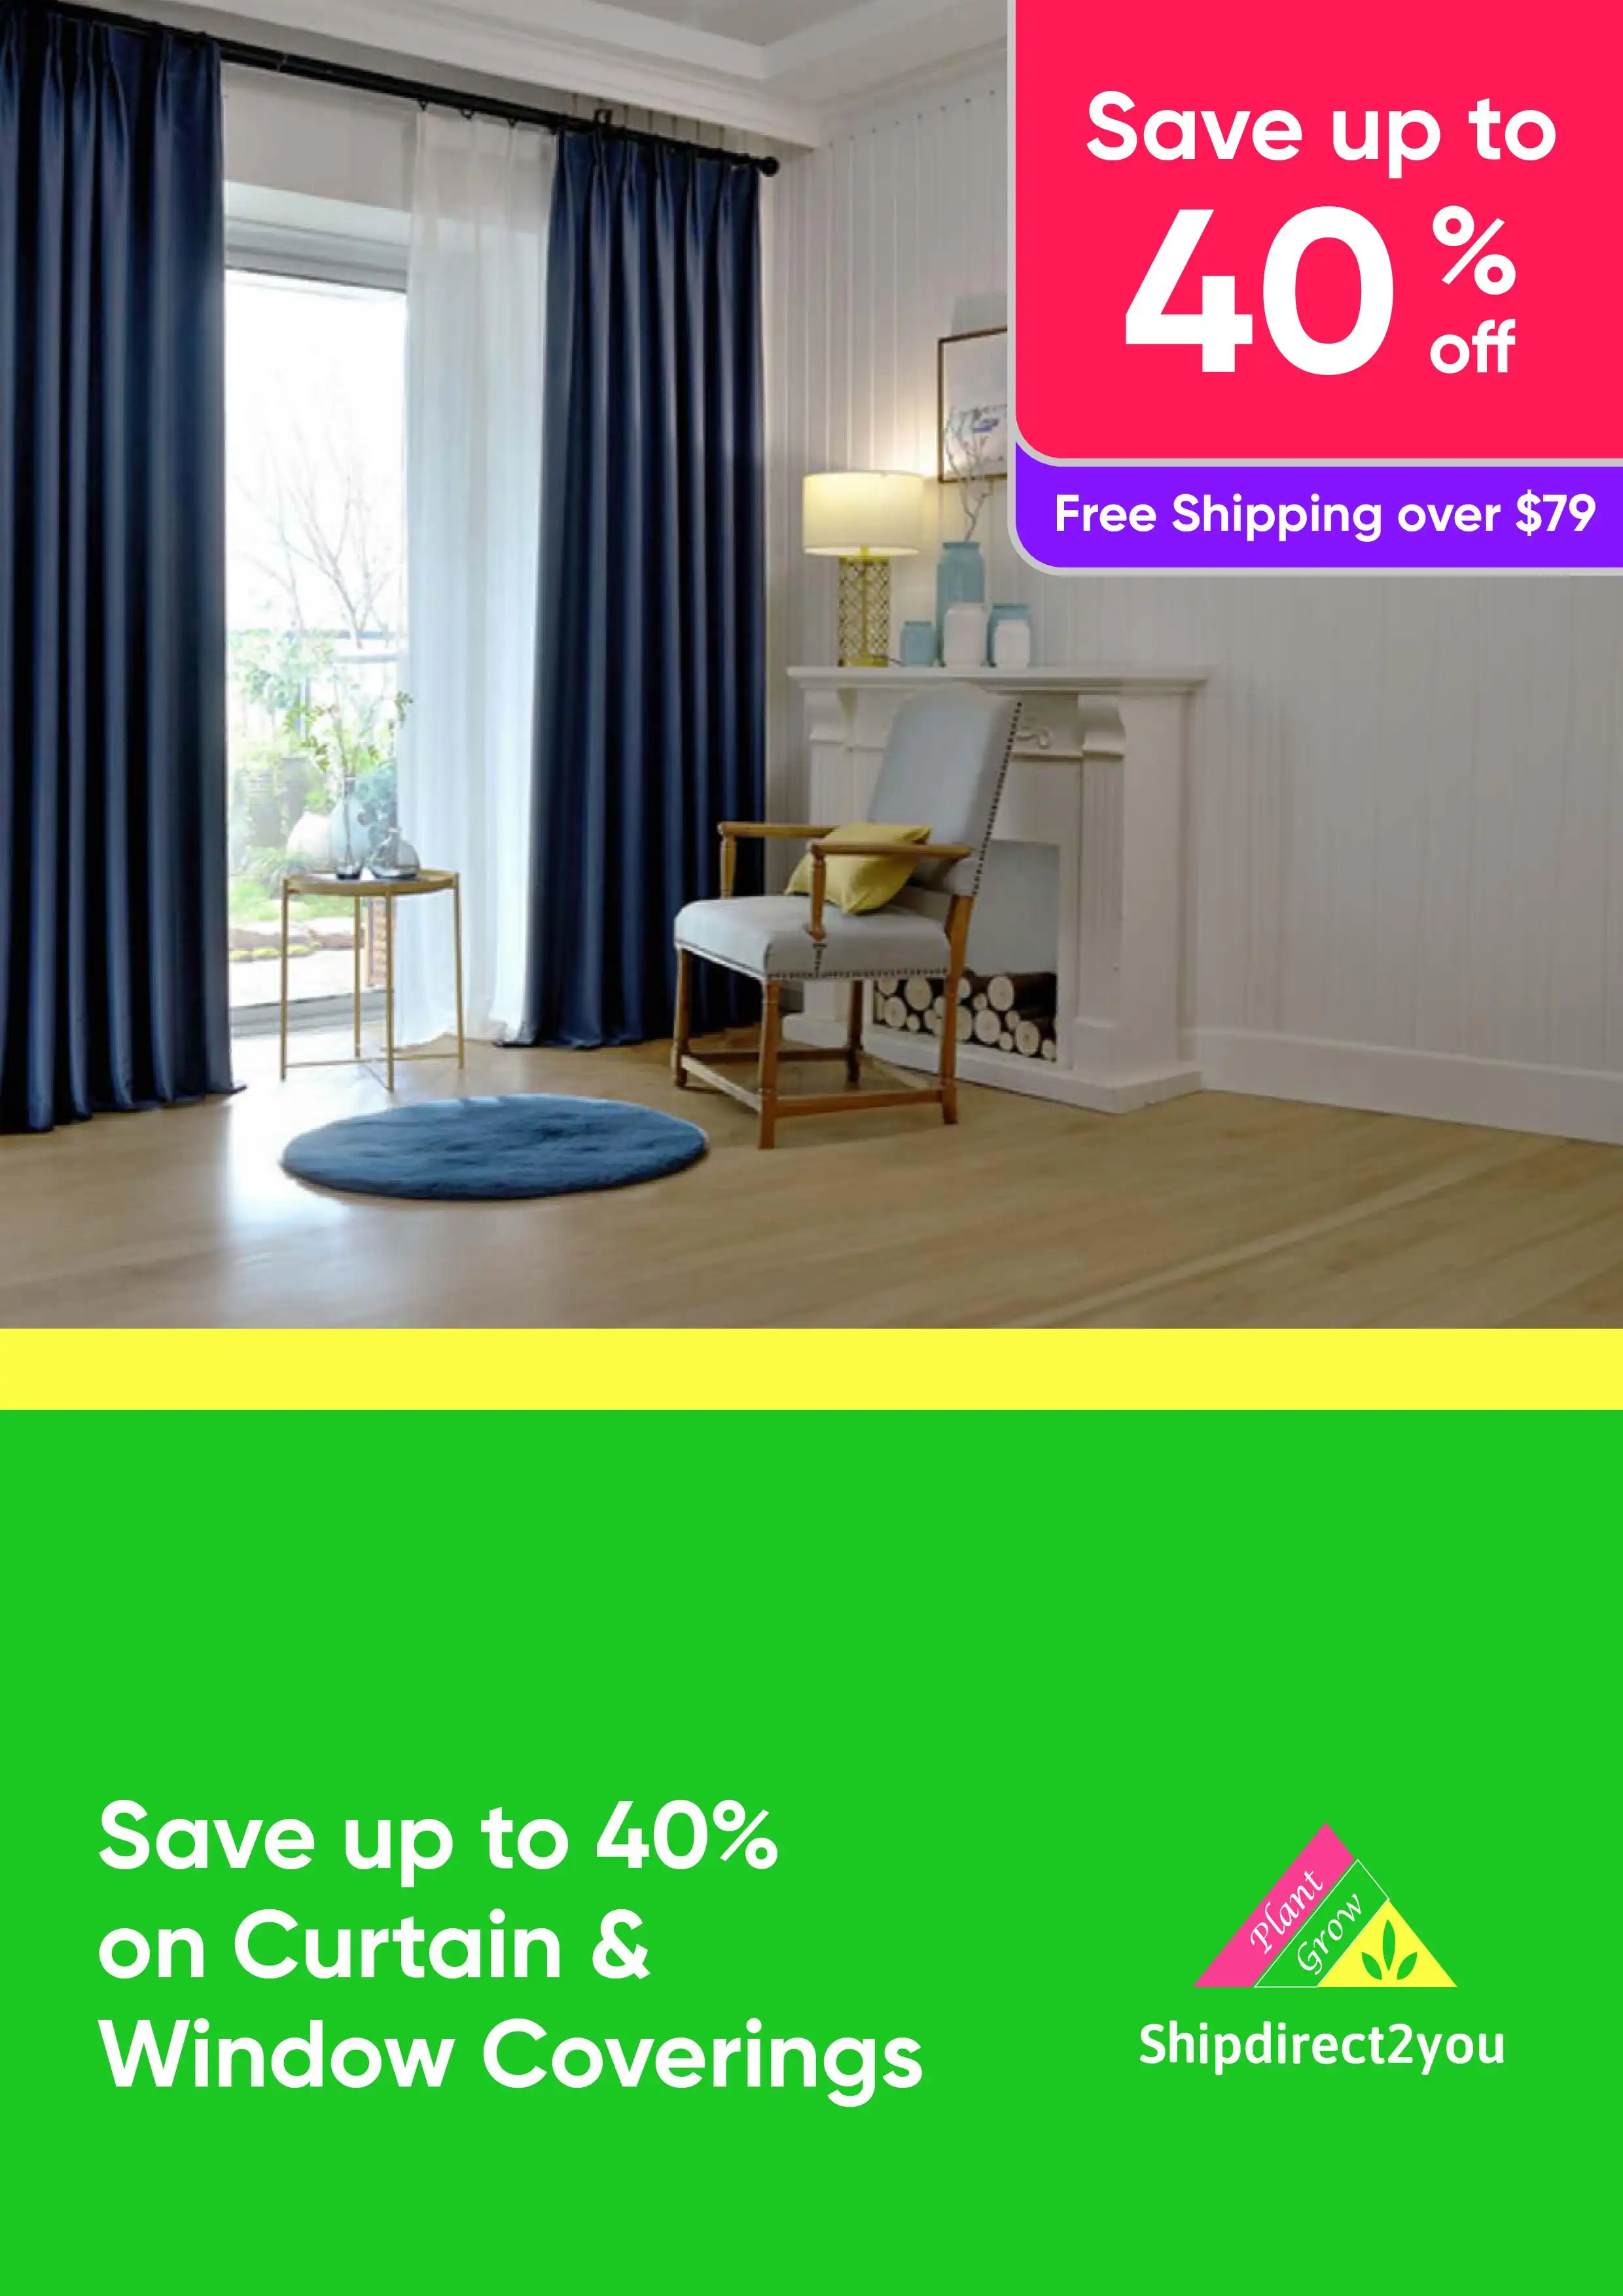 Save up to 40% on Curtain & Window Coverings